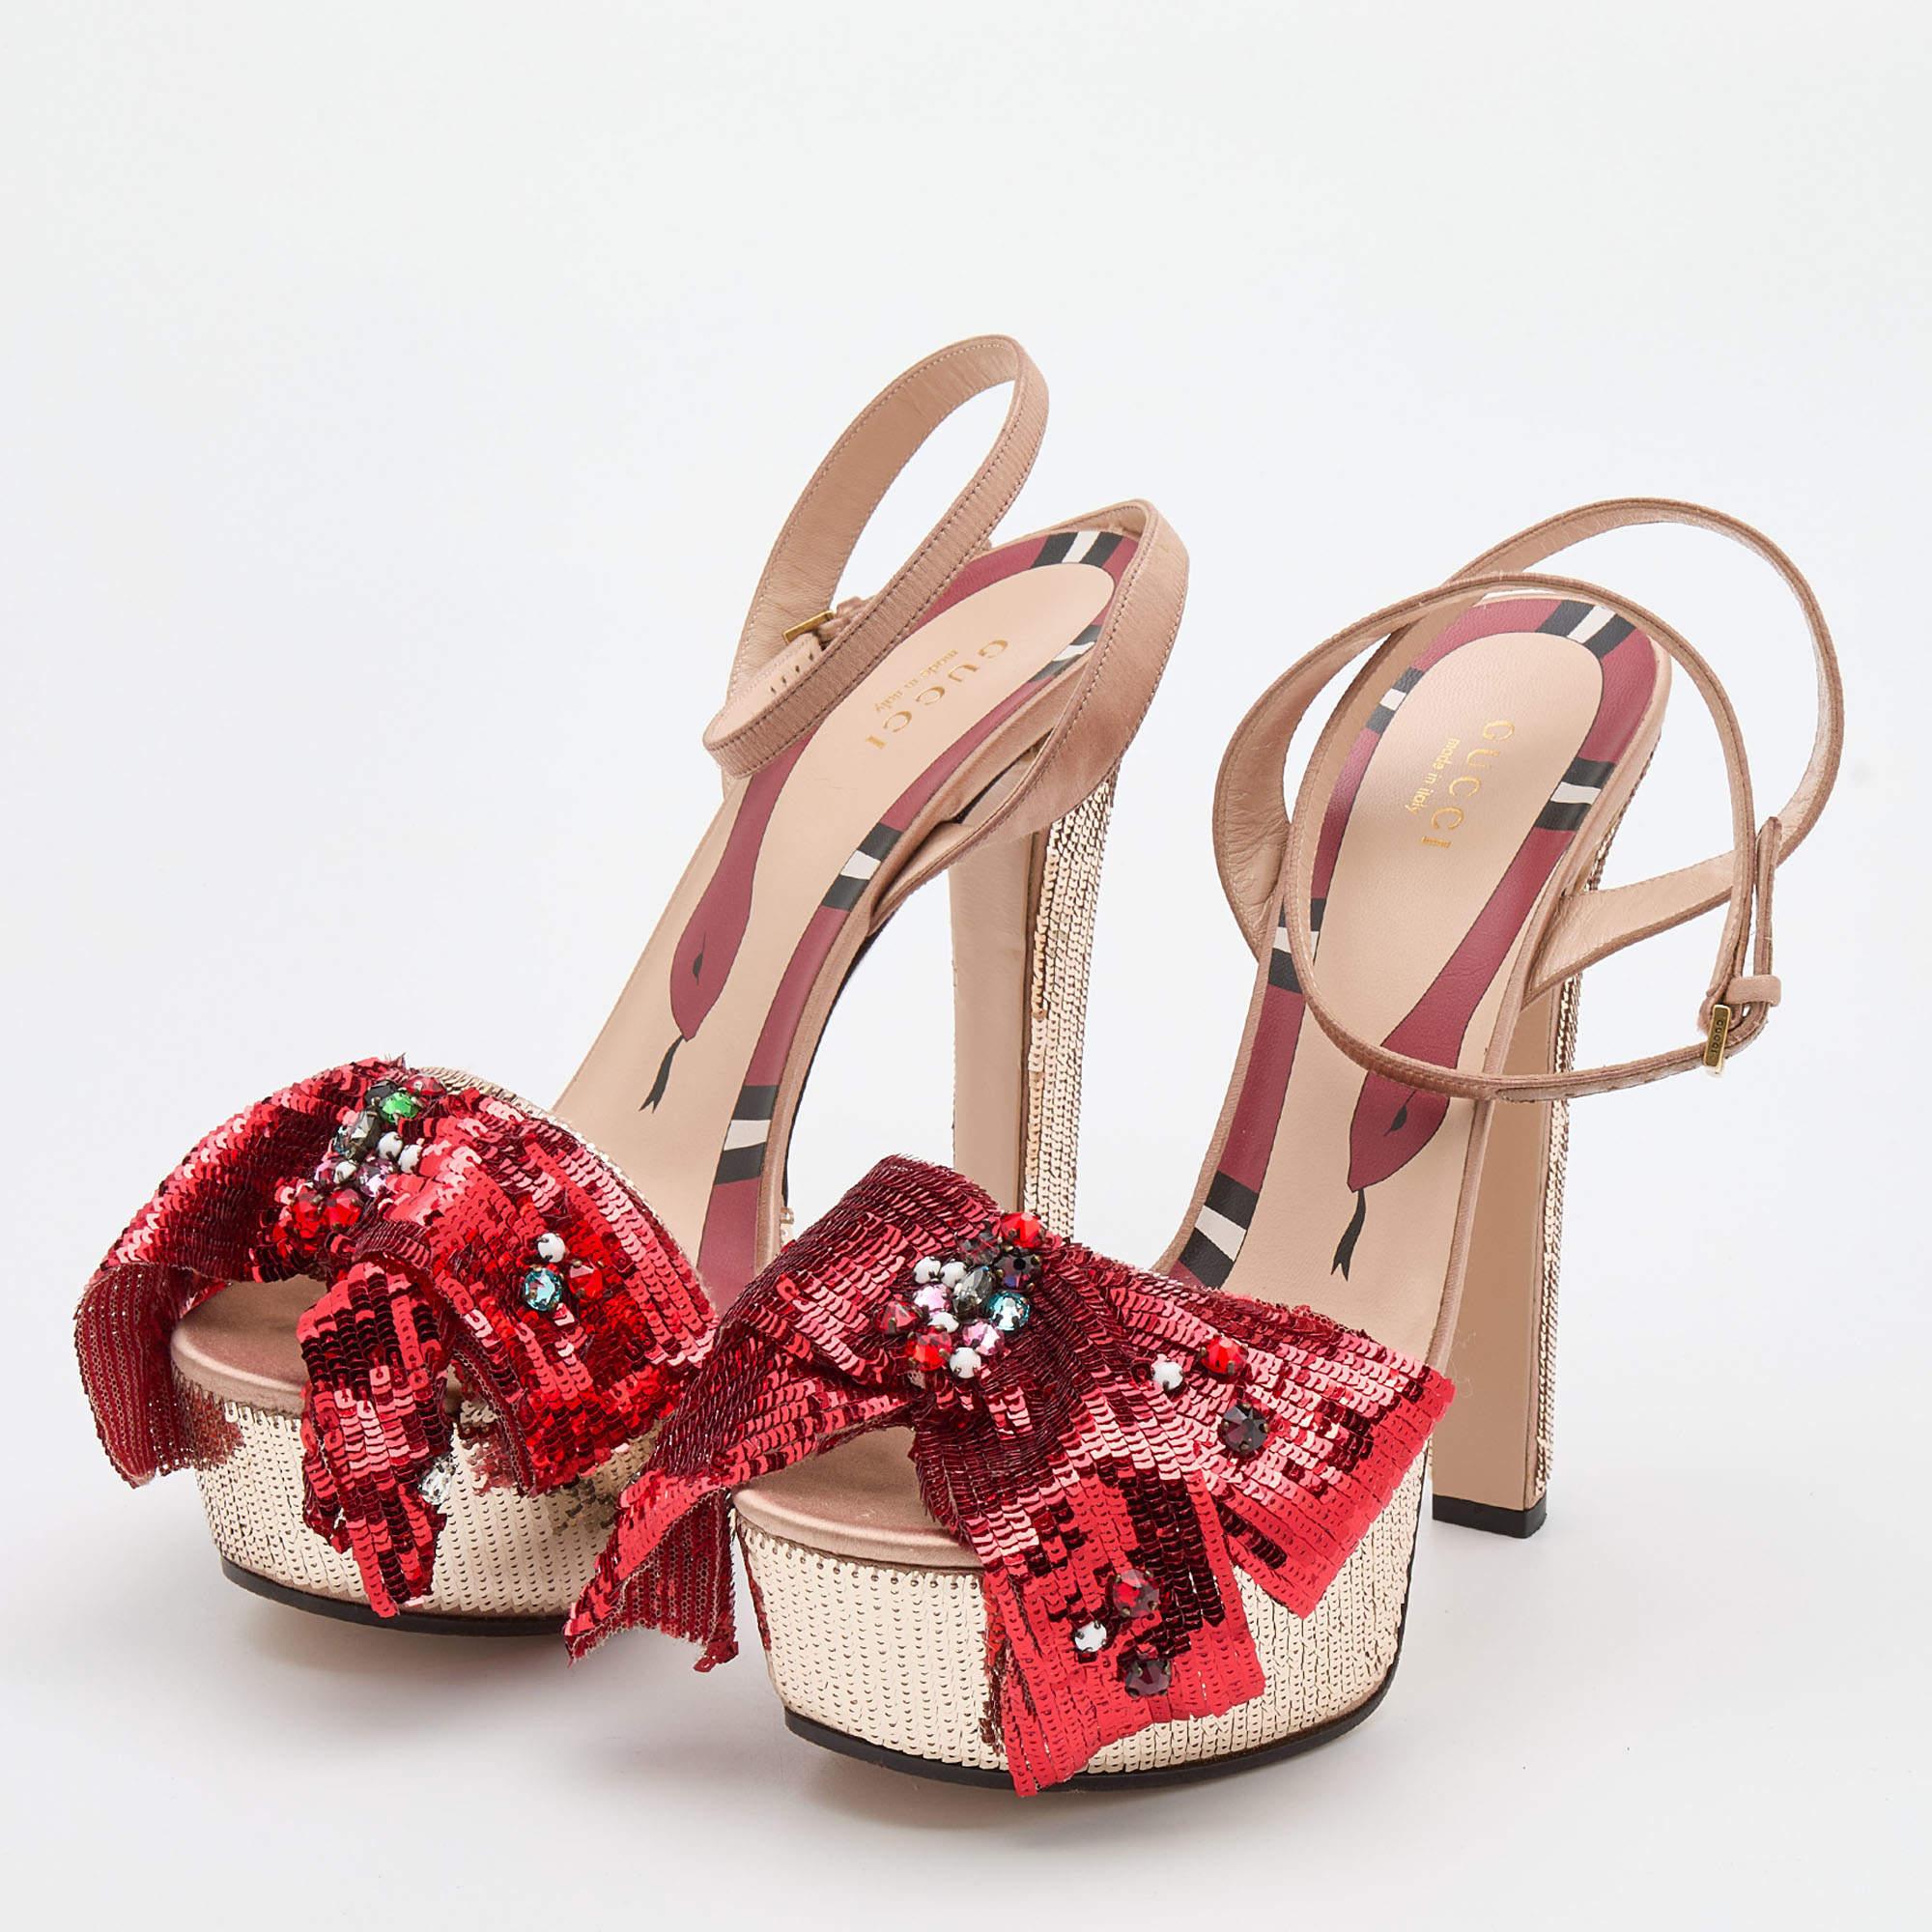 Women's Gucci Beige/Red Sequin and Satin Bow Platform Ankle Strap Sandals Size 38